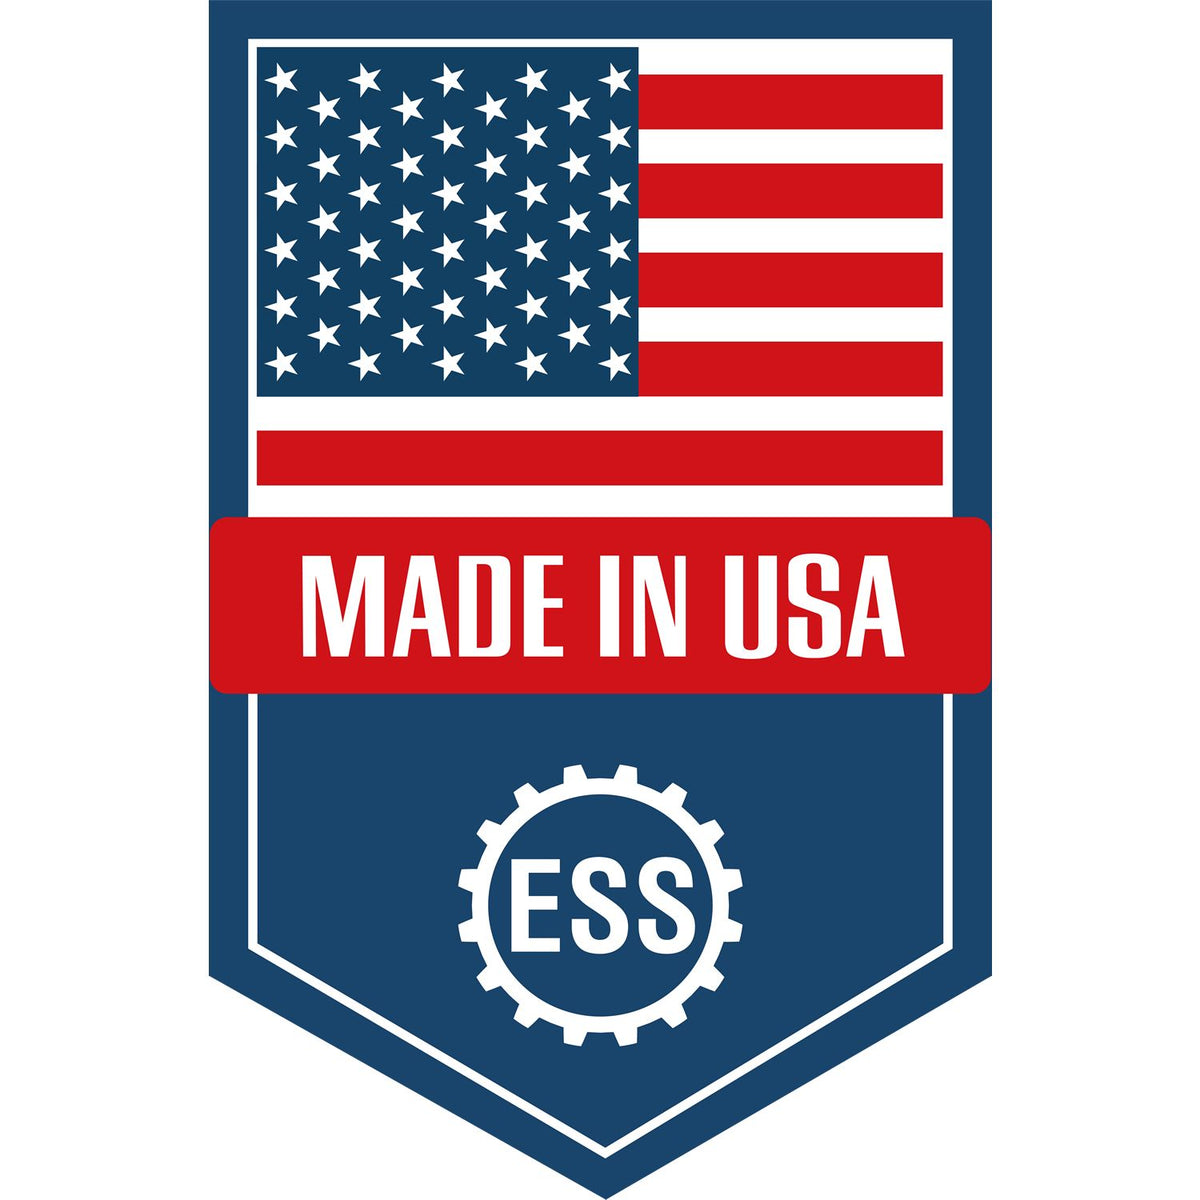 An icon or graphic with an american flag and text reading Made in USA for the Self-Inking North Carolina Landscape Architect Stamp